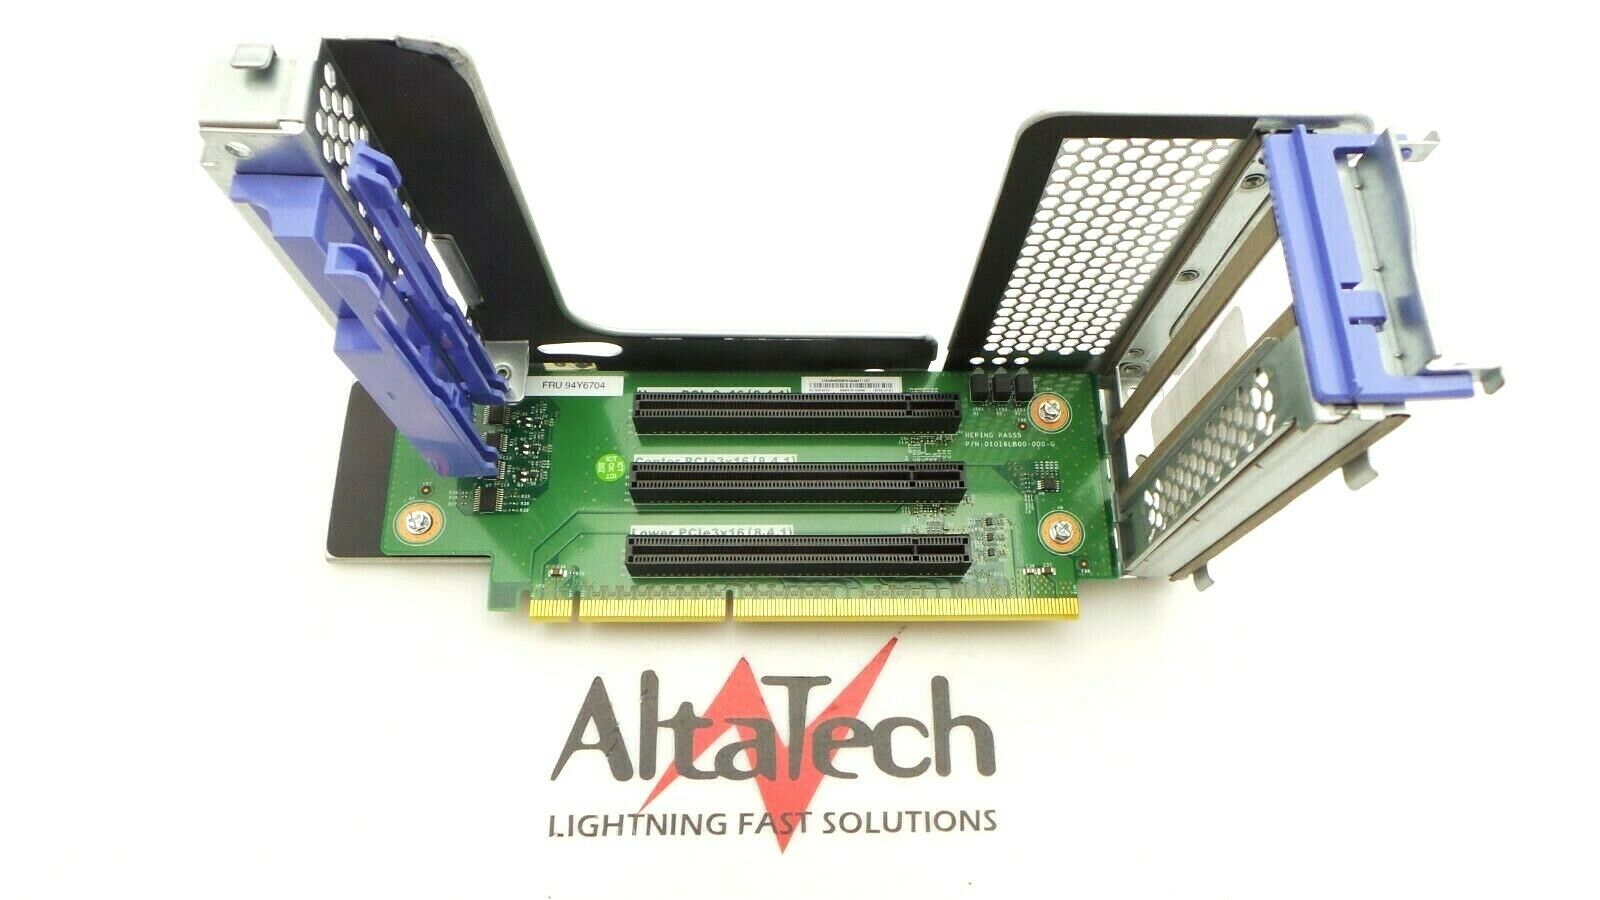 IBM 94Y6704 System X3650 M4 PCIe Riser Card Assembly, Used